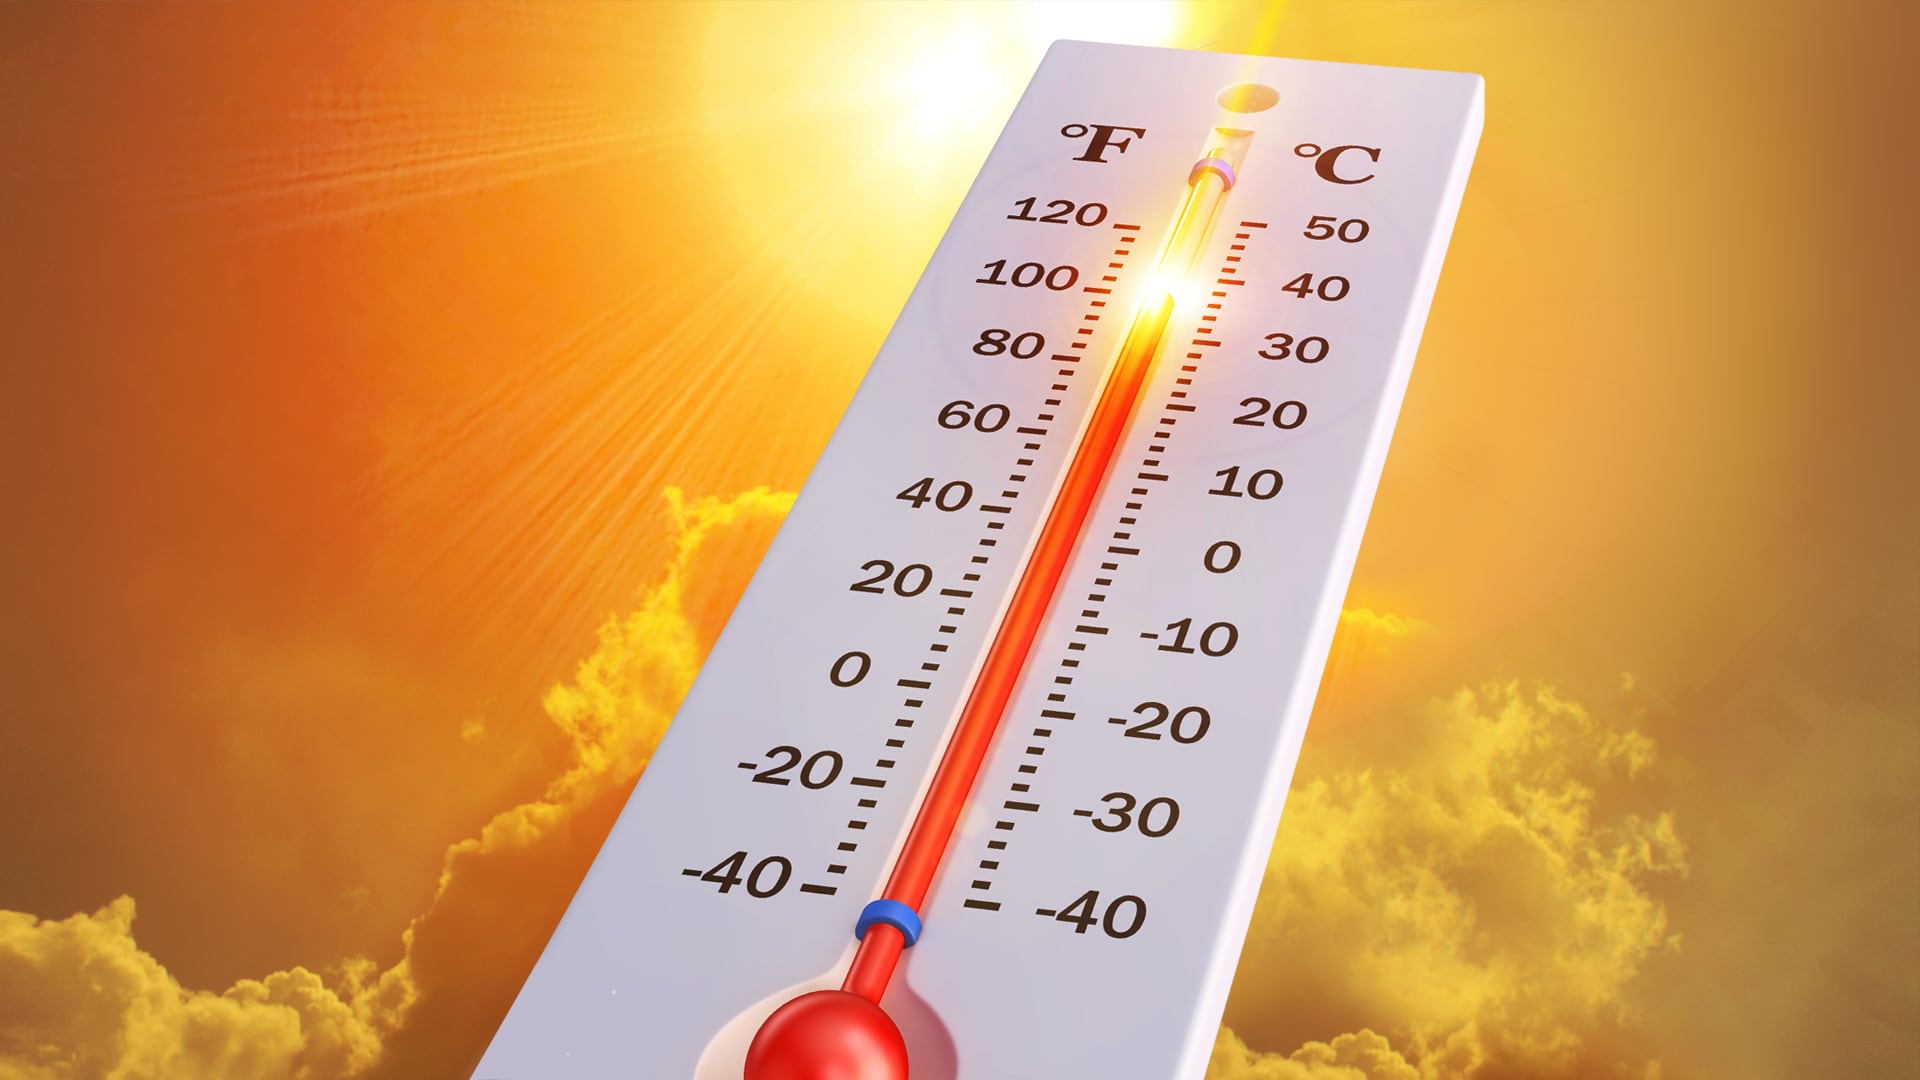 Hot! Hot! Hot! Scorching temps are here to stay. Here’s how to prepare for the extreme heat.